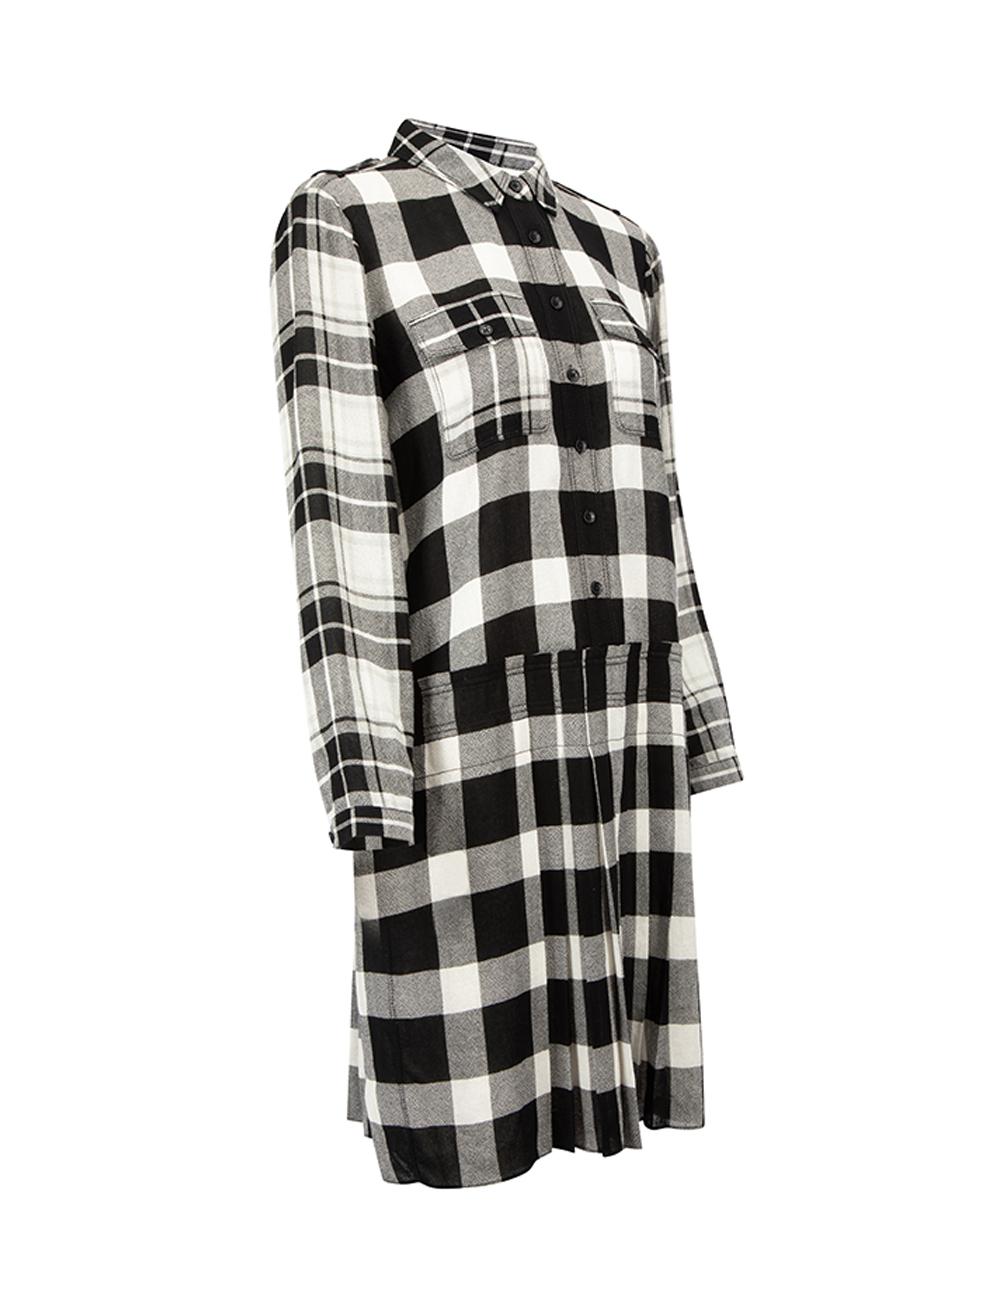 CONDITION is Very good. Hardly any visible wear to dress is evident on this used Burberry designer resale item. 
 
 
 
 Details
 
 
 Black and white
 
 Synthetic
 
 Knee-Length
 
 Check pattern
 
 Front button up closure
 
 Buttoned cuffs
 
 Front